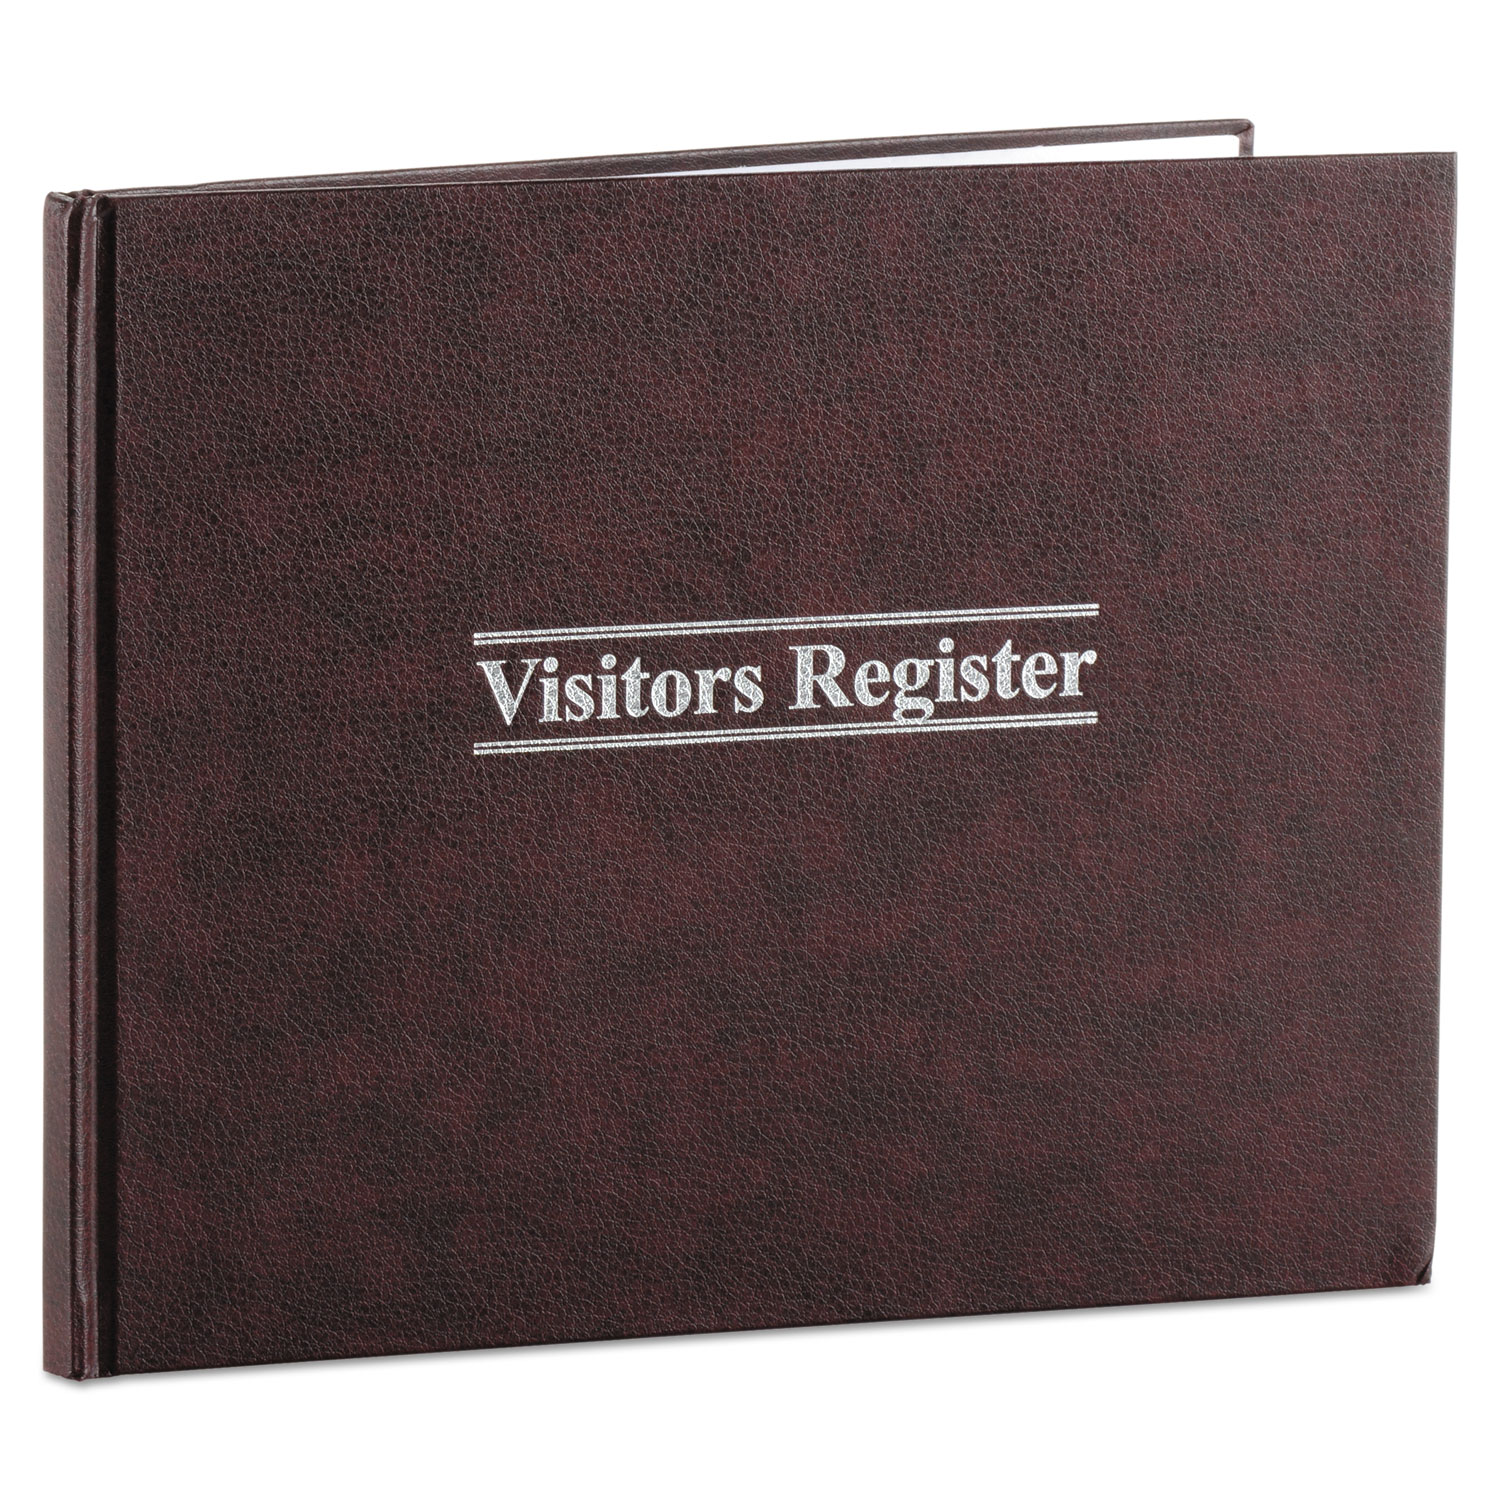 Visitor Register Book, Red Hardcover, 112 Ruled Pages, 8 1/2 x 11